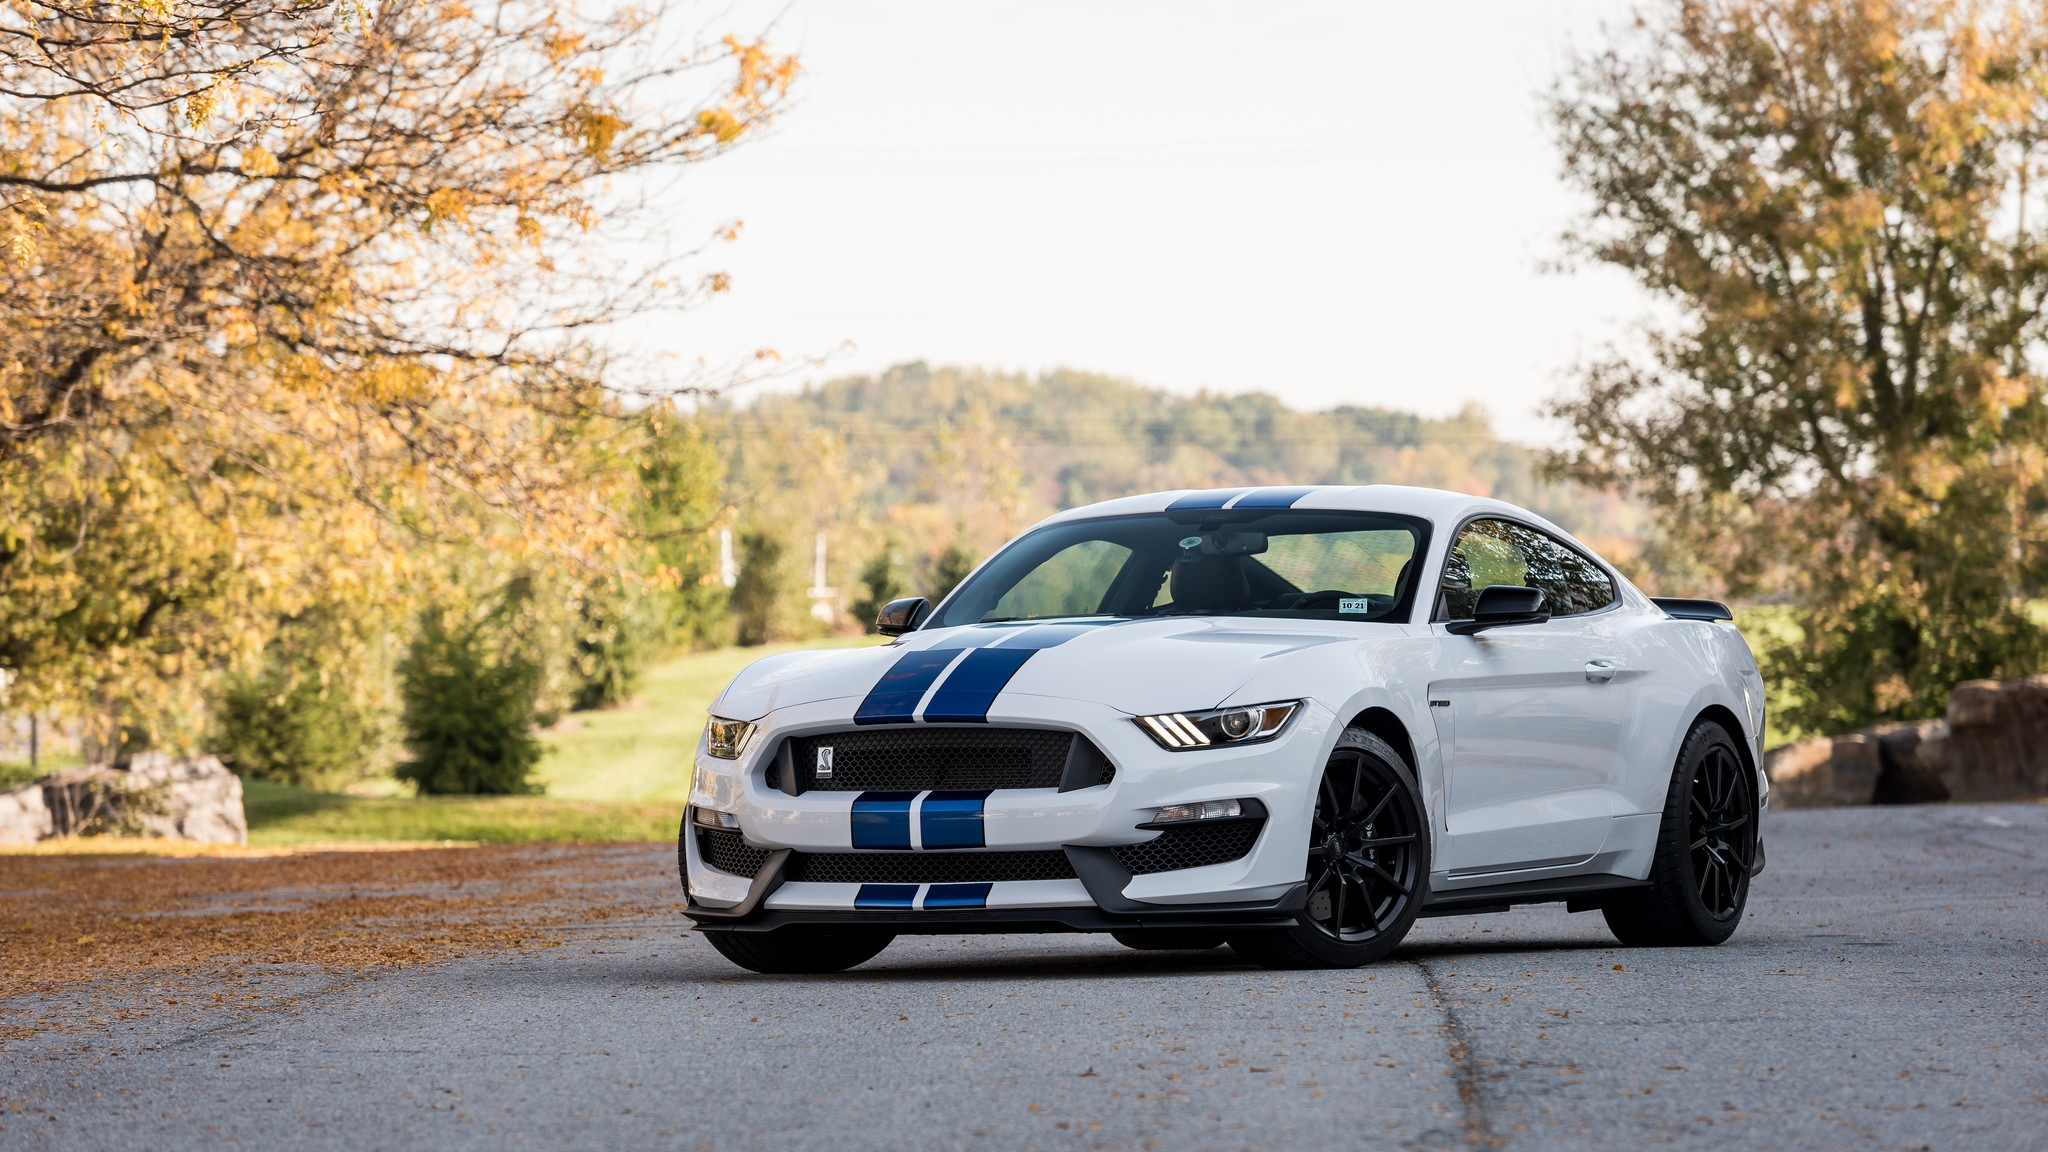 2048x1152 Wallpaper : car, nature, depth of field, Ford Mustang Shelby, Shelby GT350 lagito37 1278585 HD Wallpapers